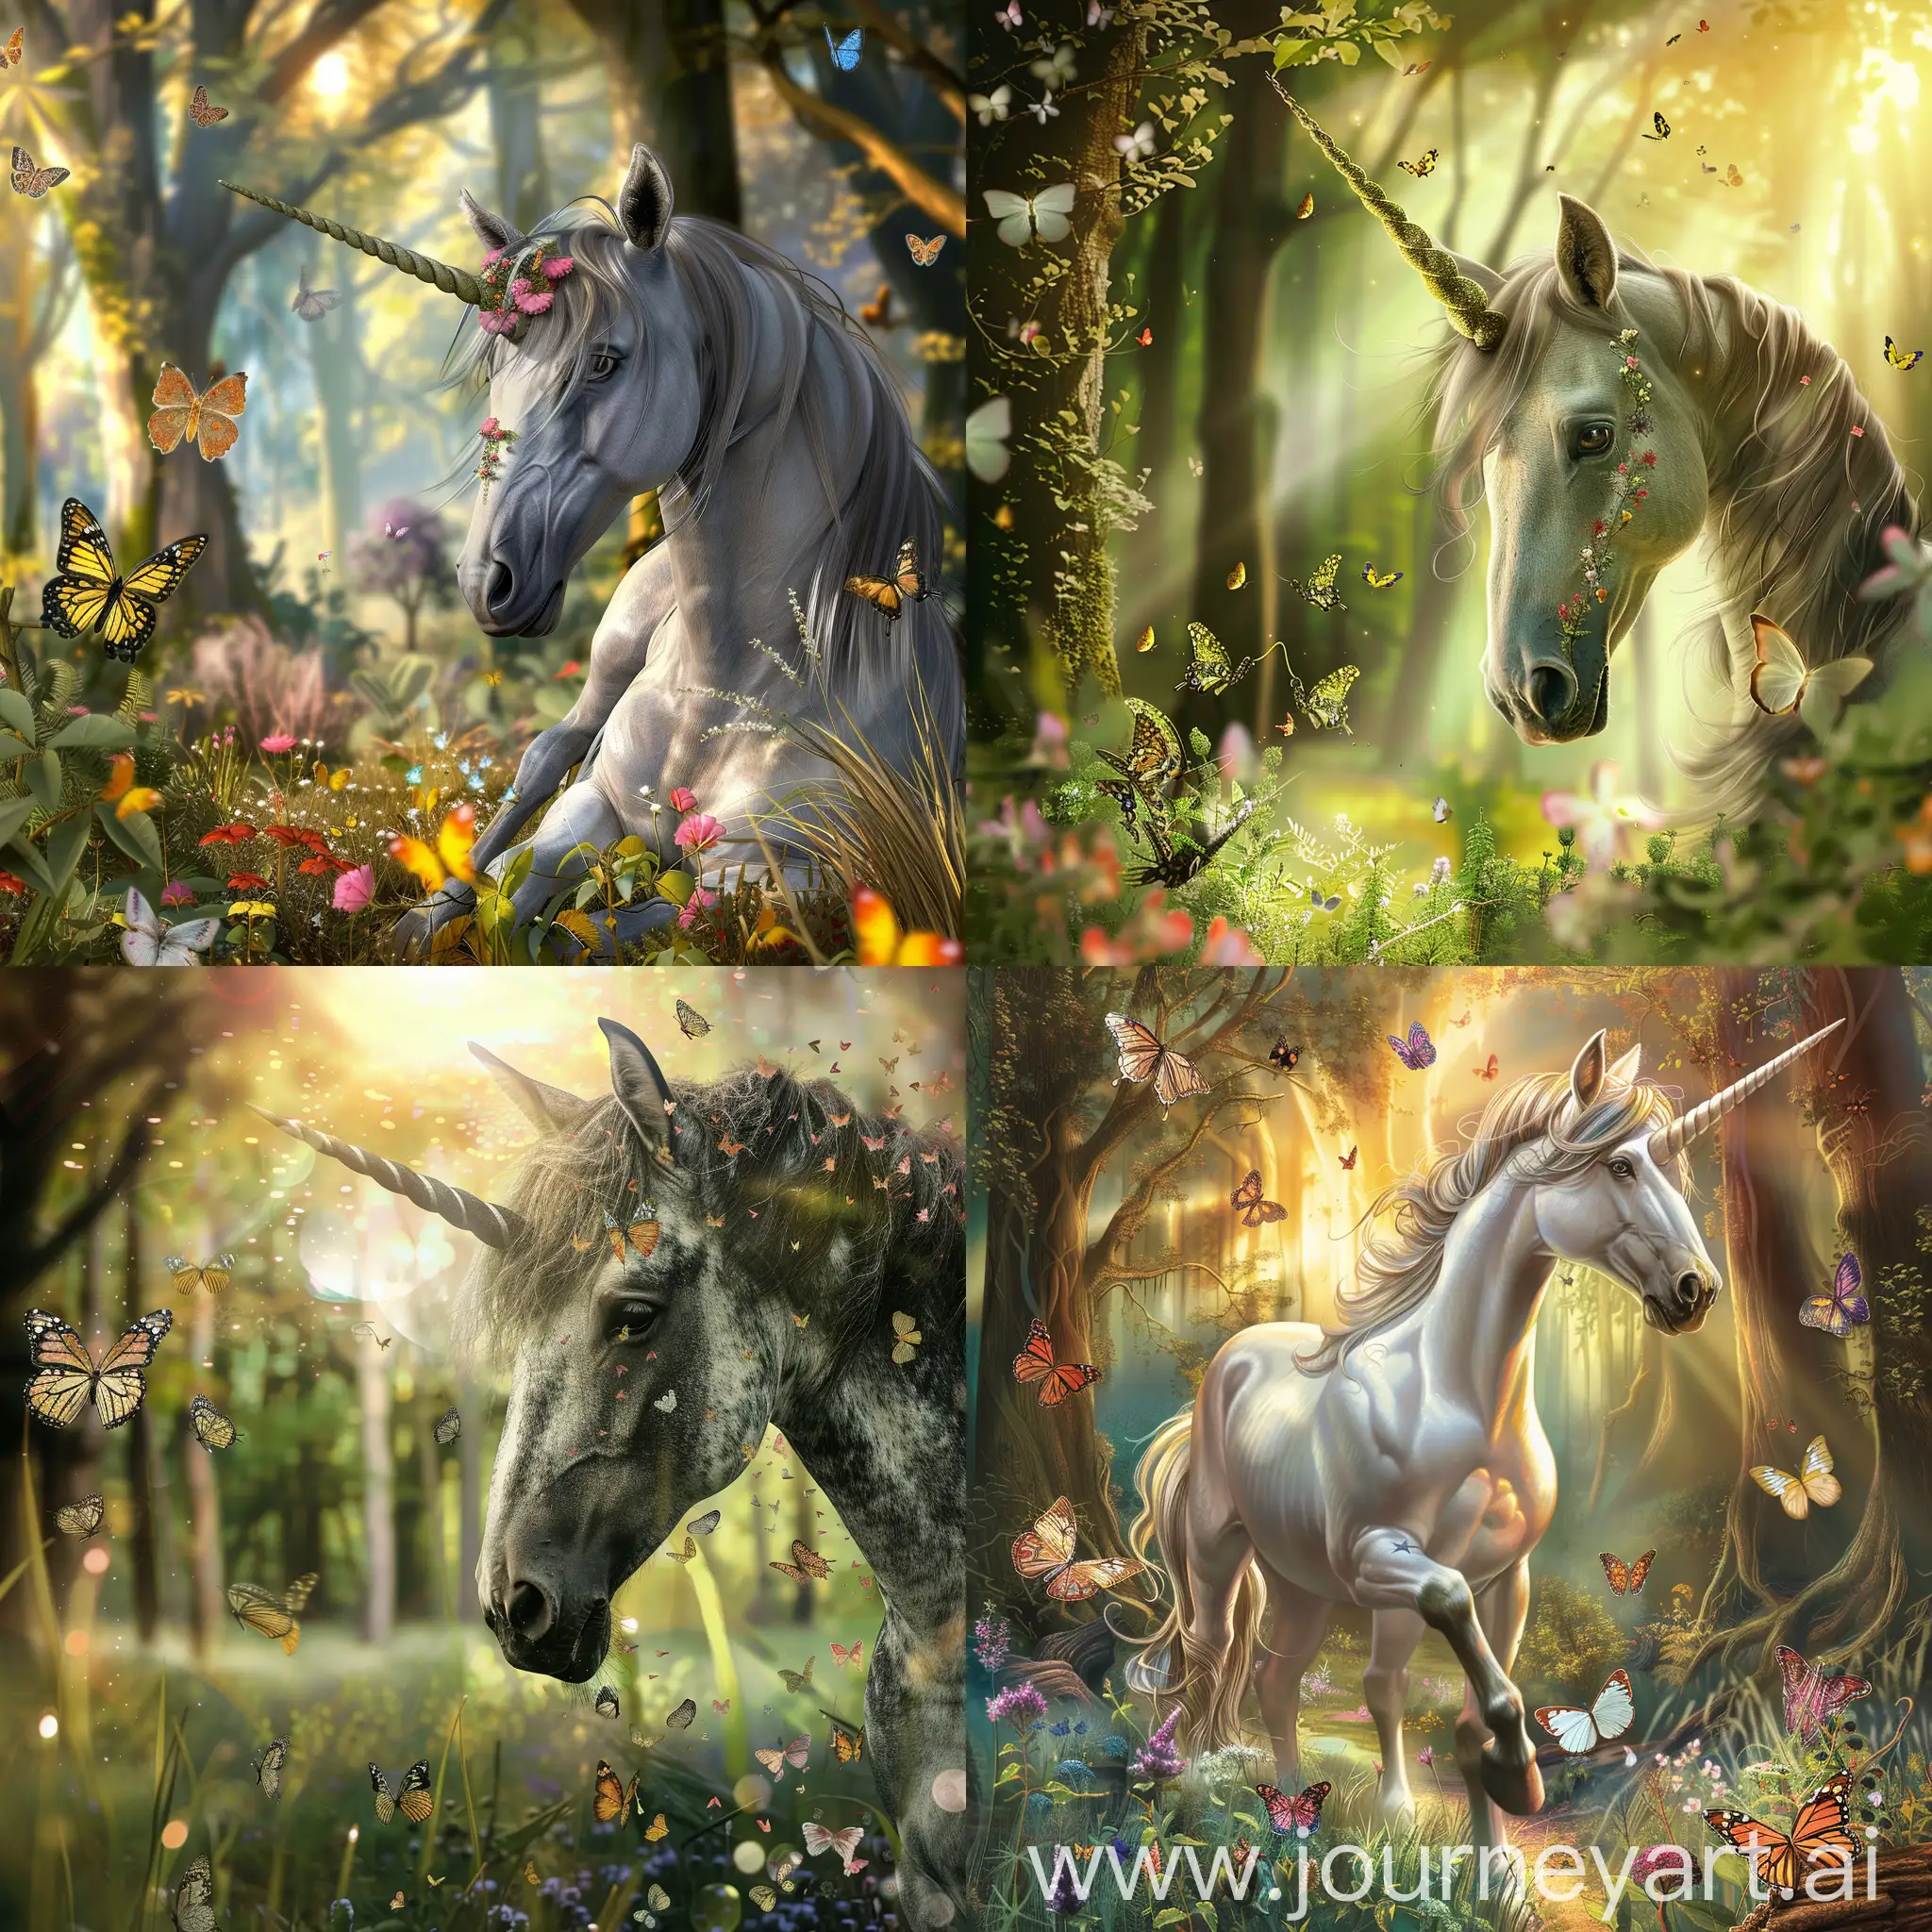 Enchanting-March-Scene-Unicorn-Amidst-Butterflies-in-a-Forest